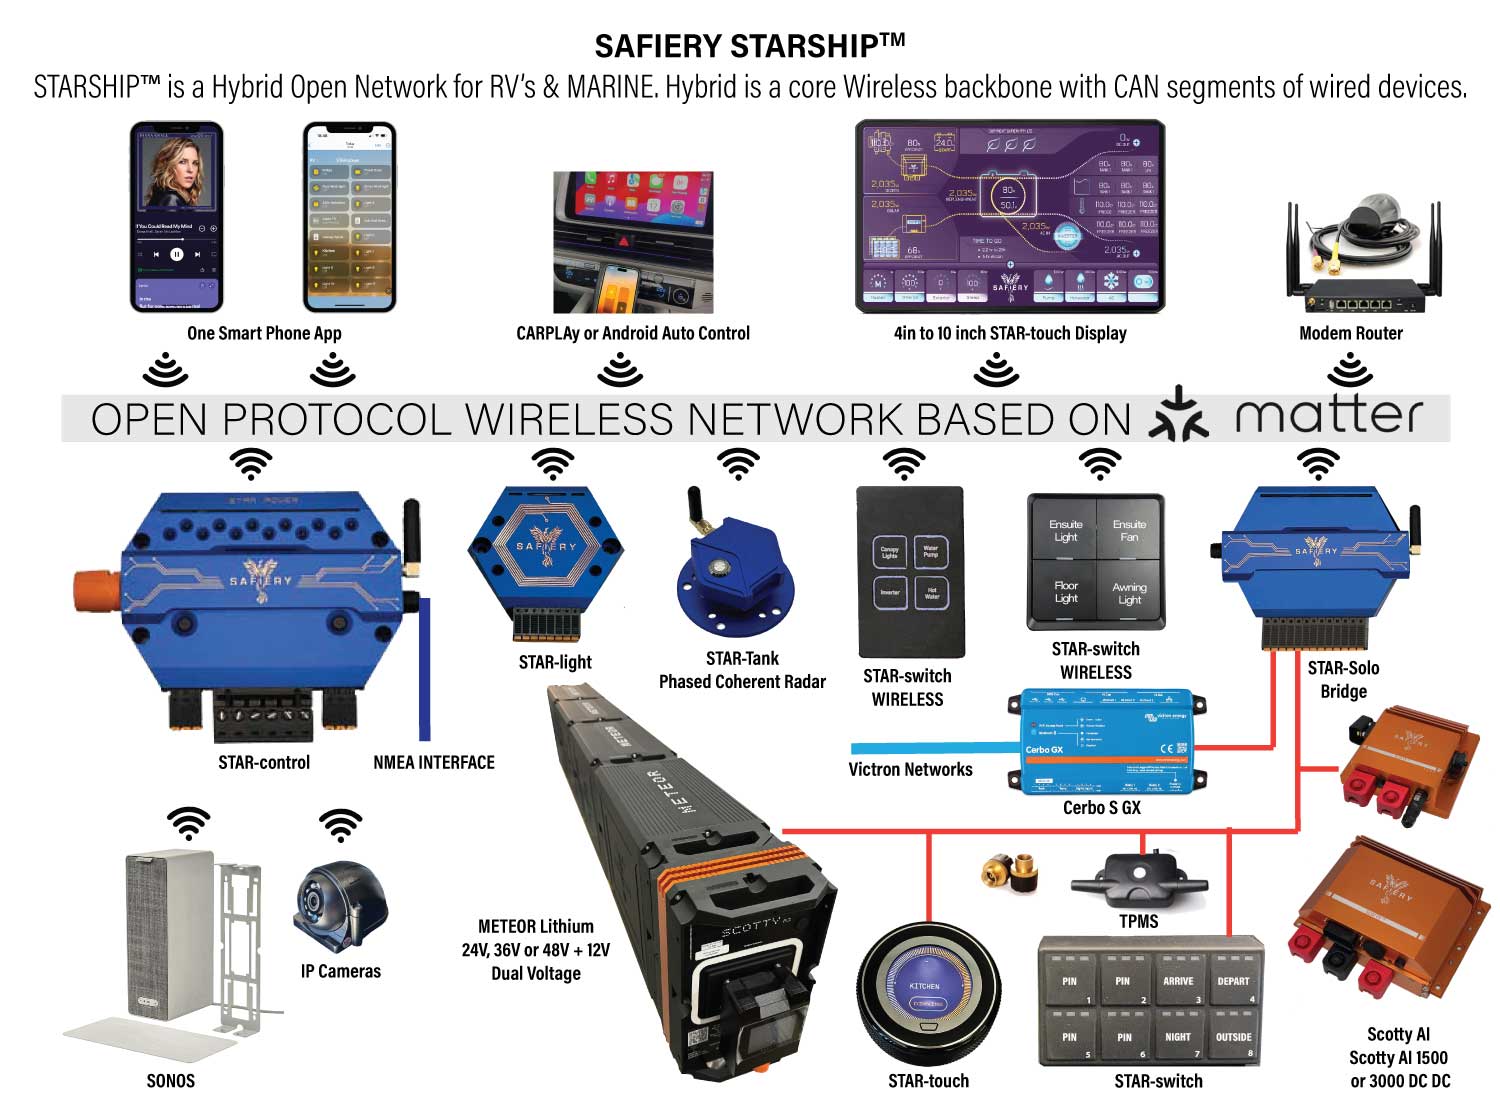 STARship Hybrid Open network of Wireless and Wired Segments Digital switching Control